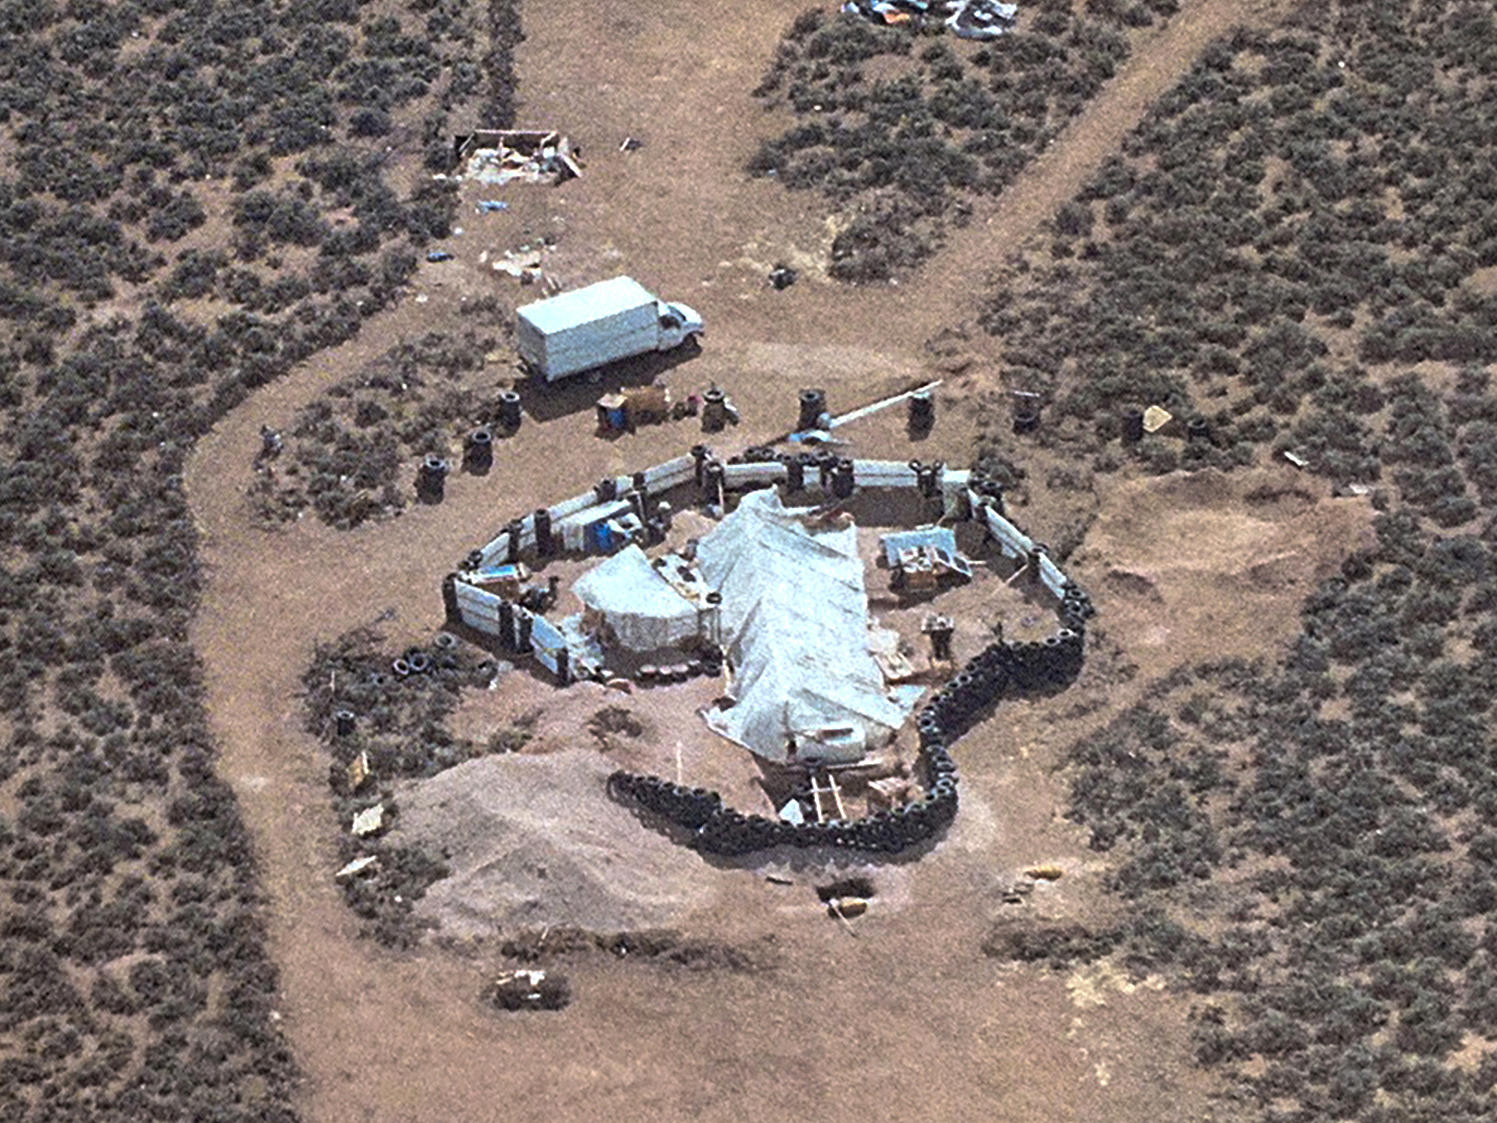 CNN: Remains of boy found during search of New Mexico compound